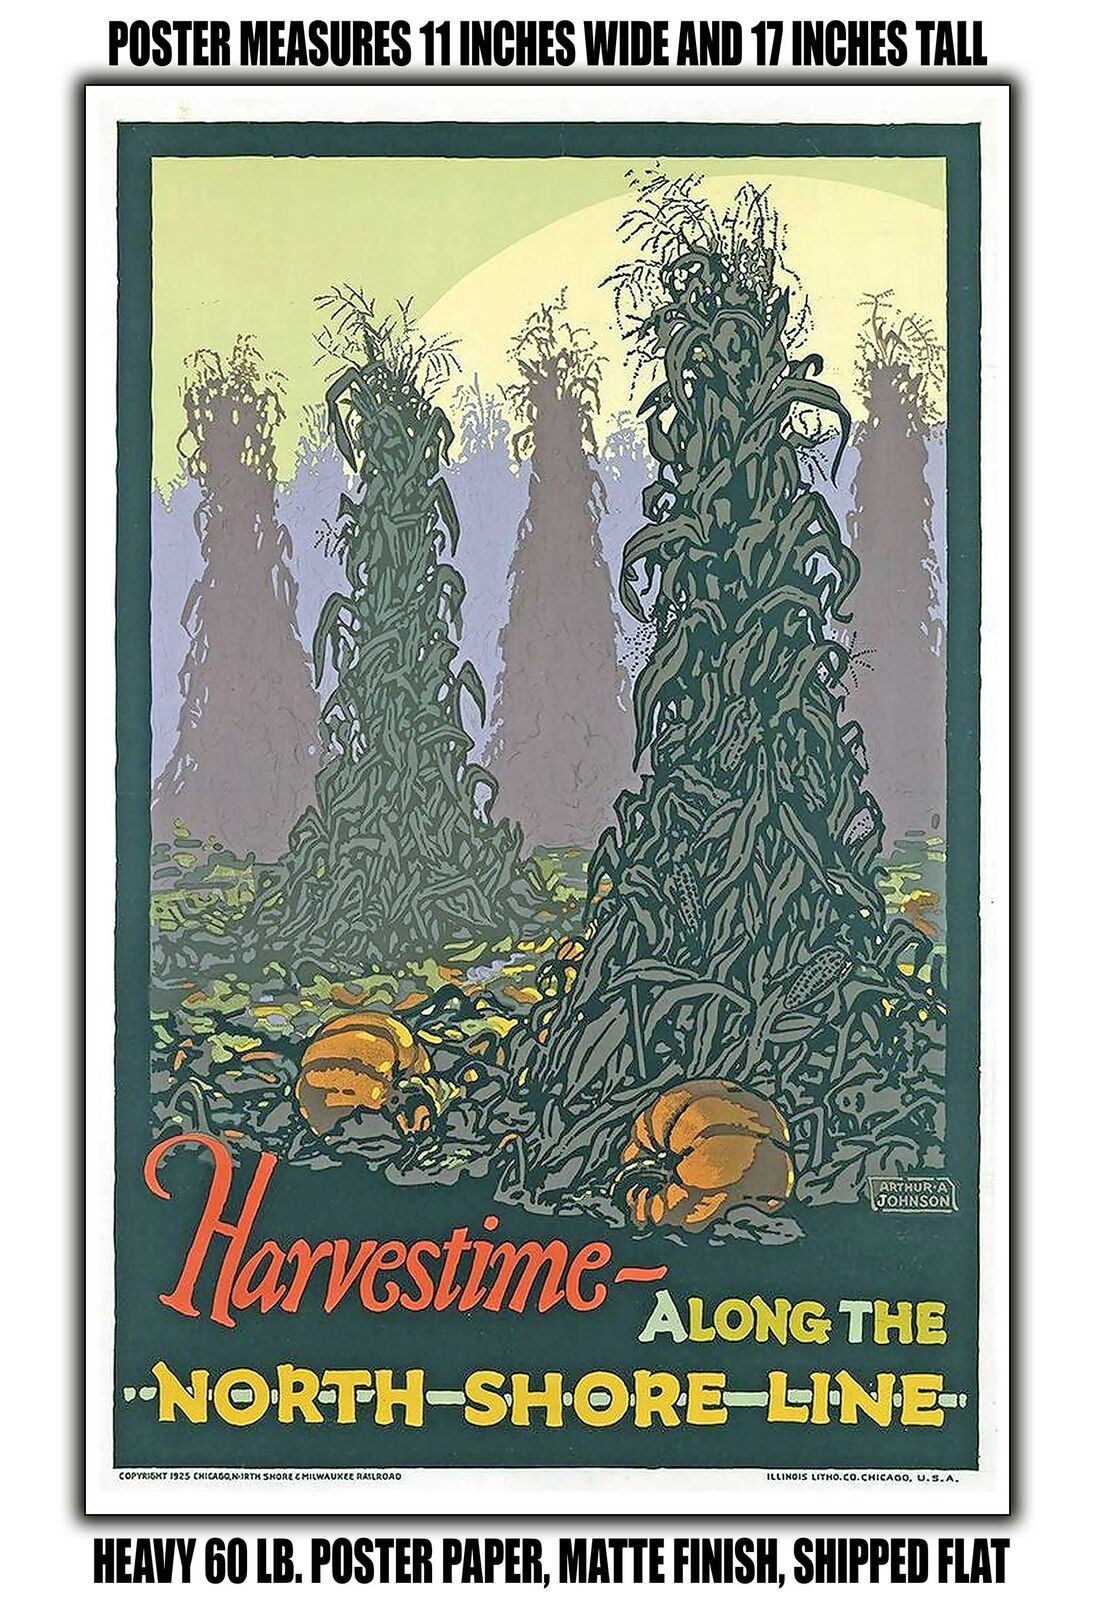 11x17 POSTER - 1925 Harvestime Along the North Shore Line